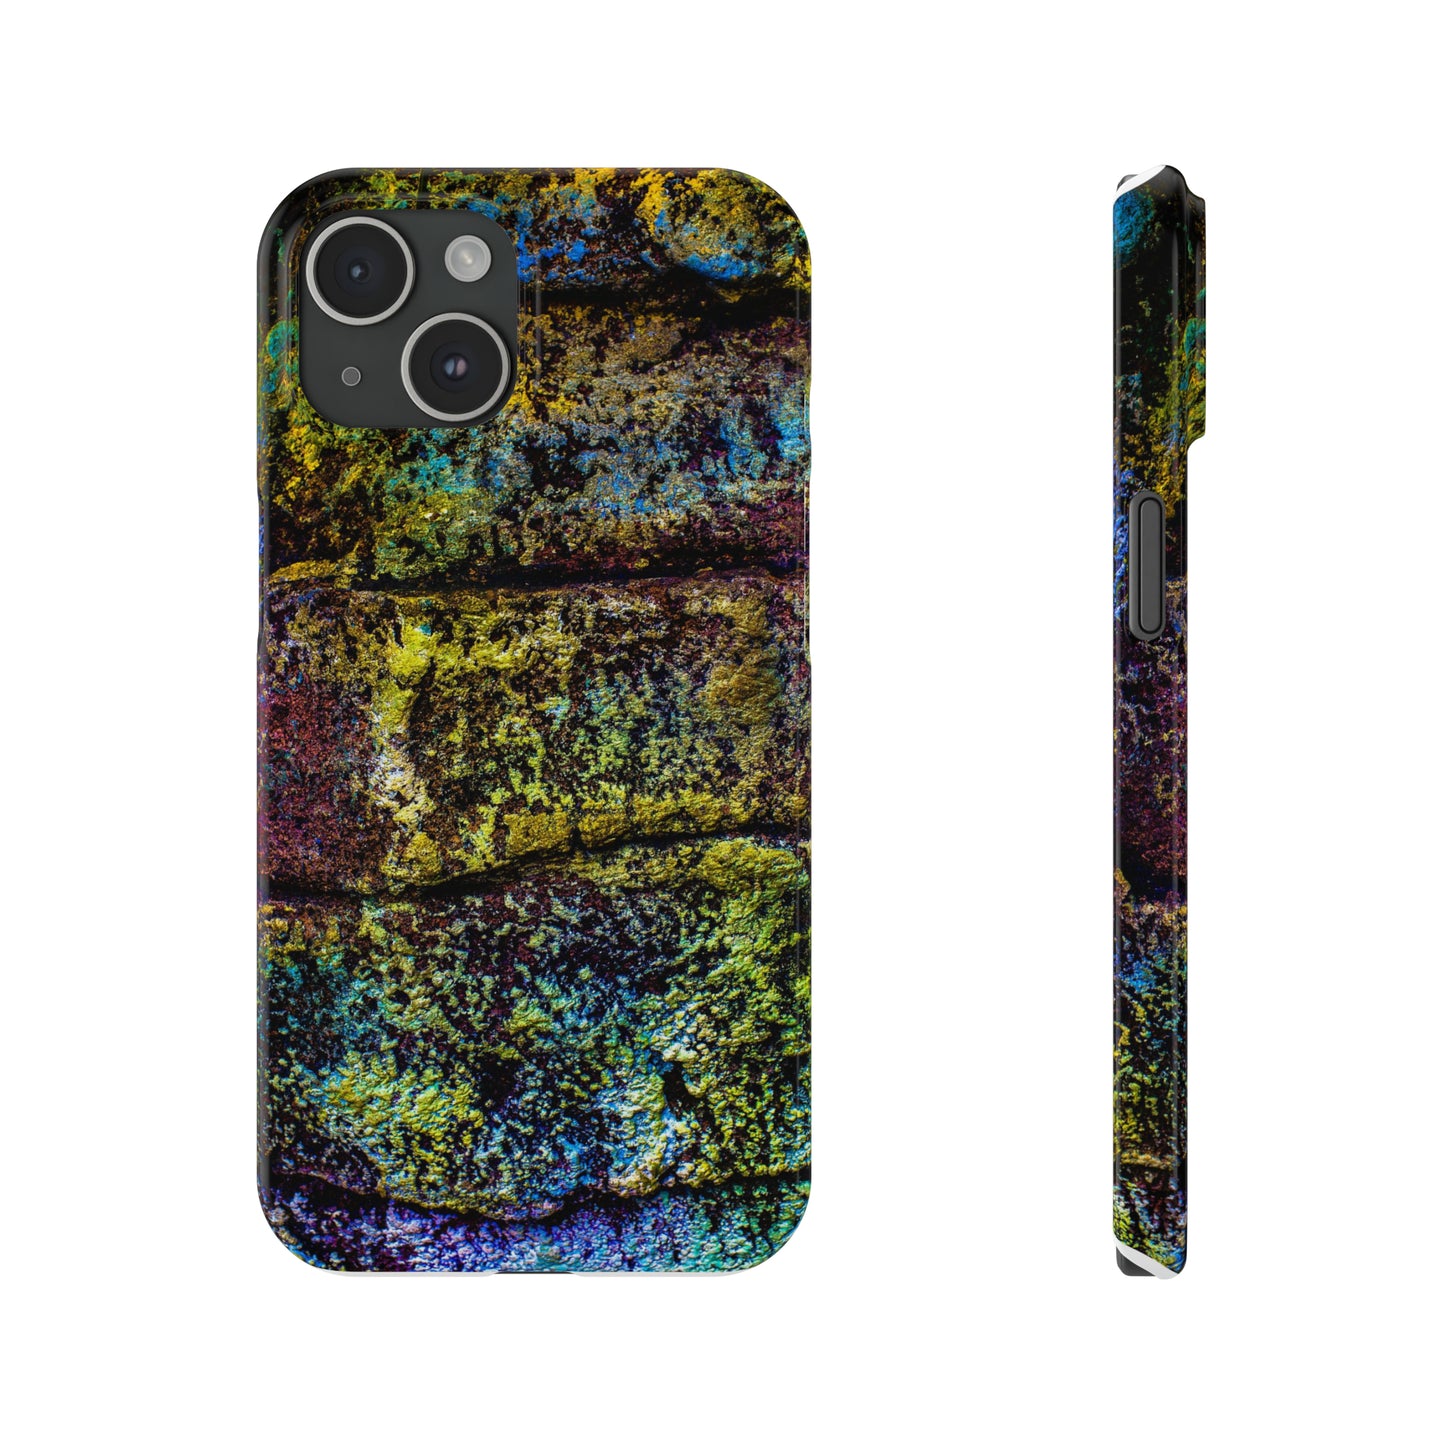 iPhone 14 or 15, Plus, Pro and Pro Max Cases - Indonesia Art Texture